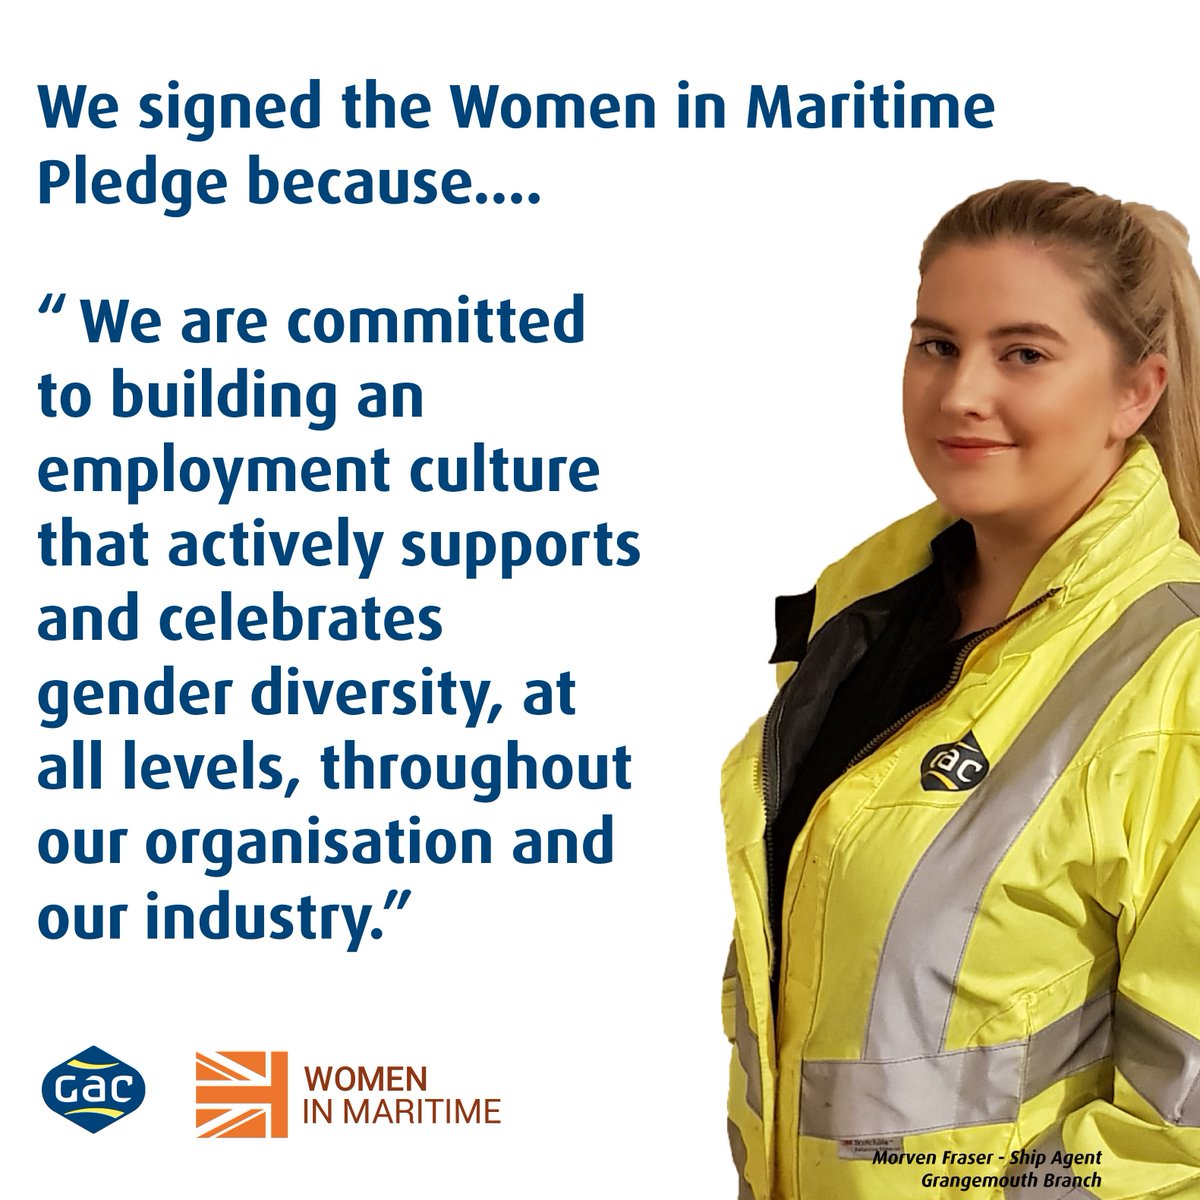 On #InternationalWomensDay our respect goes out to all the women at GAC and across the world. Back in Oct 2019 we took our first step in supporting @WomenInMaritime  by signing The Pledge. 

#EachforEqual #WomenInShipping  @MaritimeUK #WomenInMaritime #ShipsandShipping #IWD2020